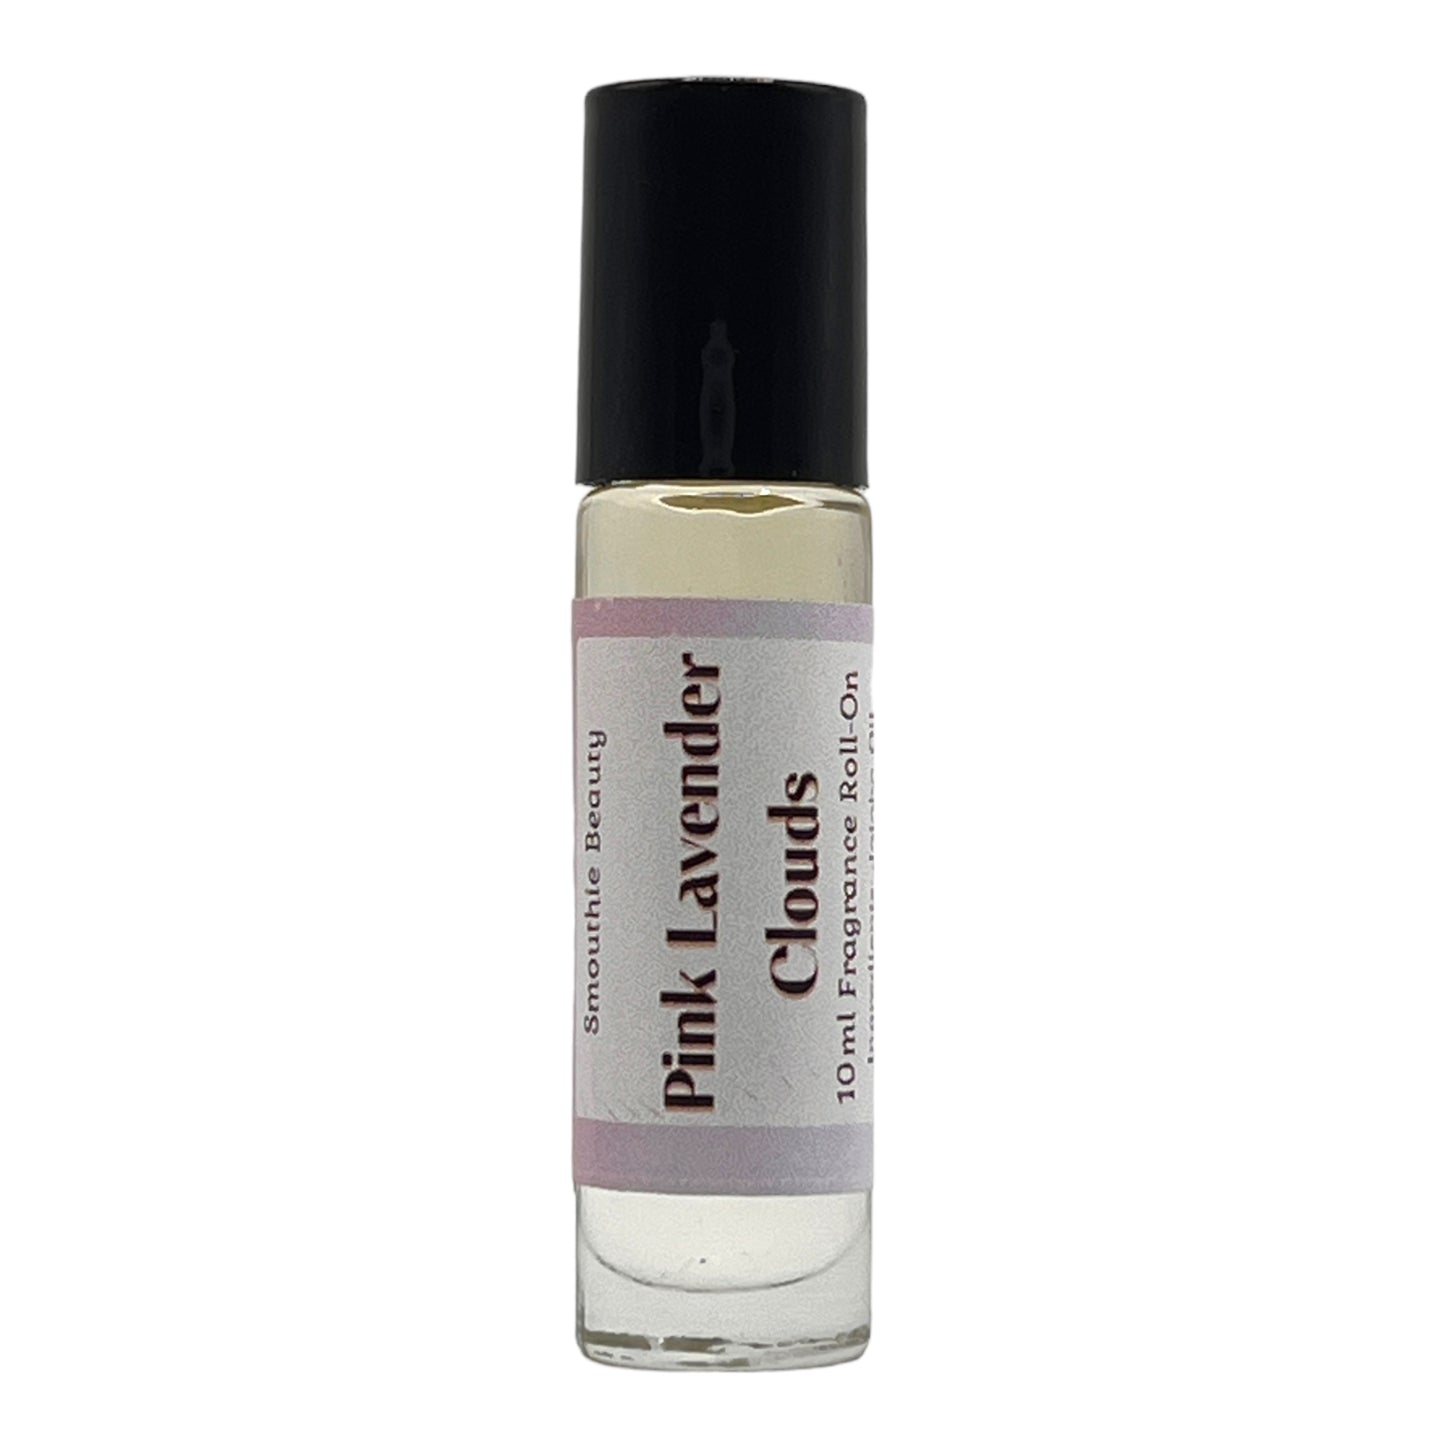 Pink Lavender Clouds Perfume Oil Fragrance Roll On